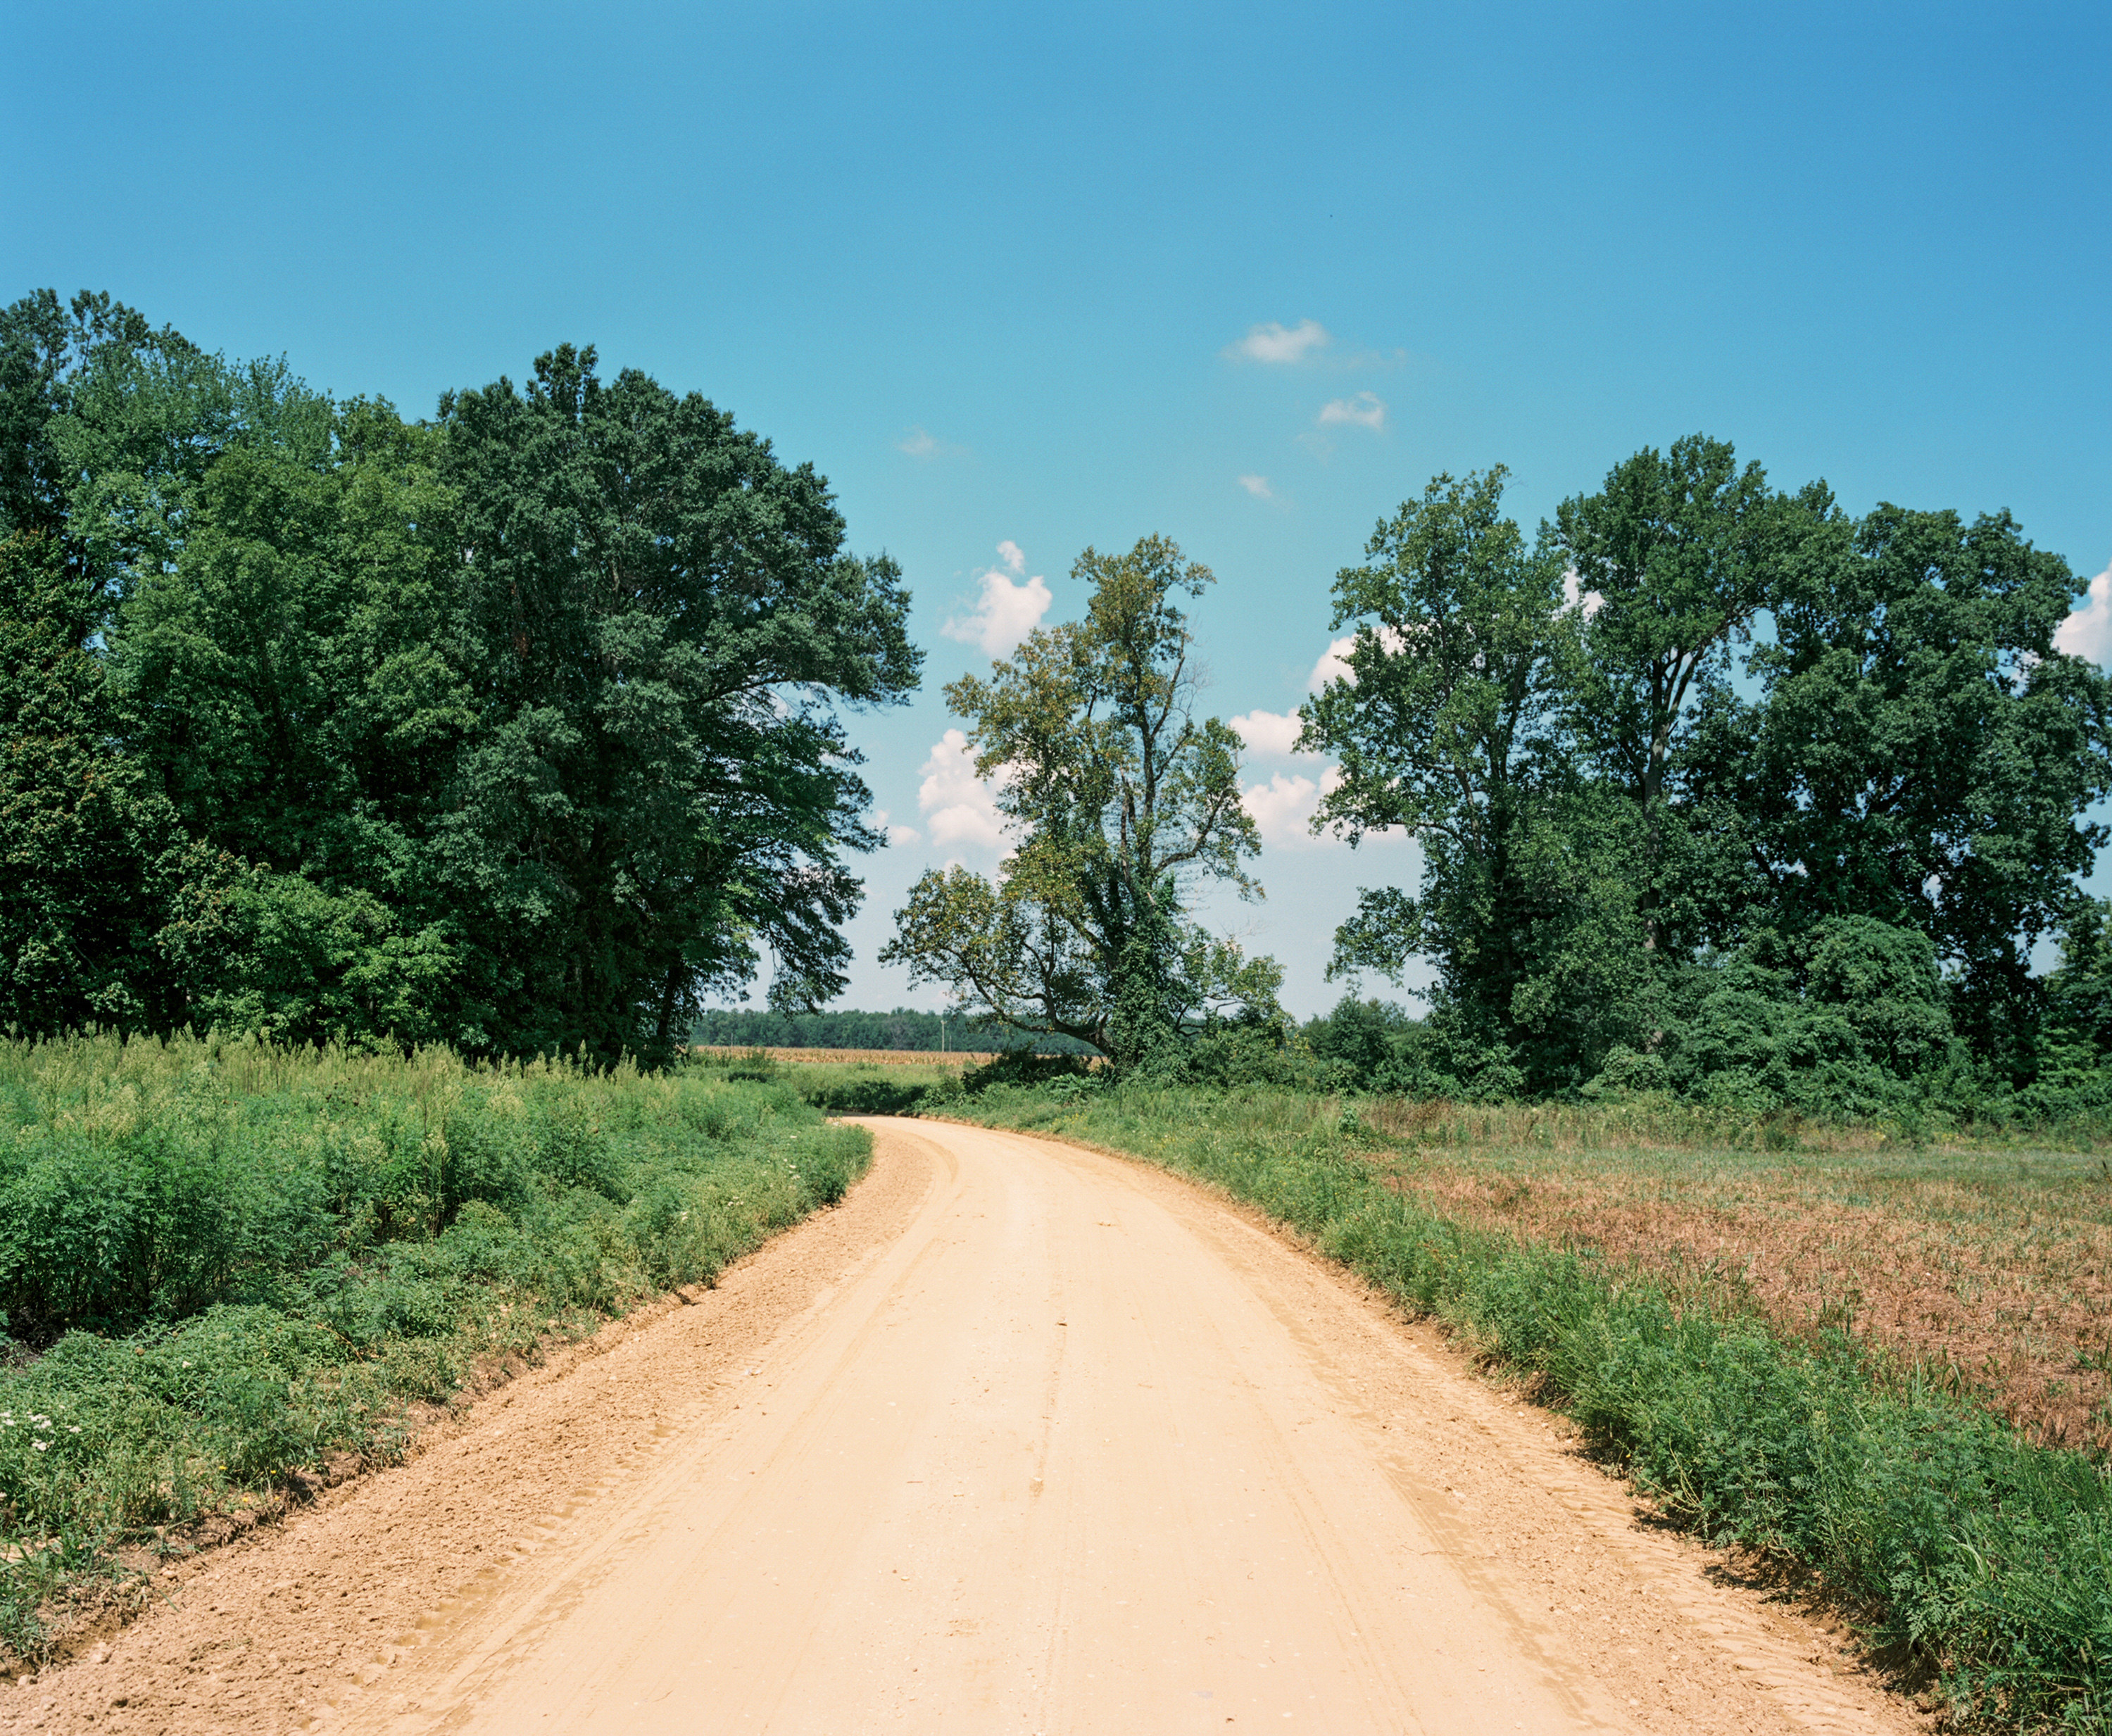 A dirt road in the countryside